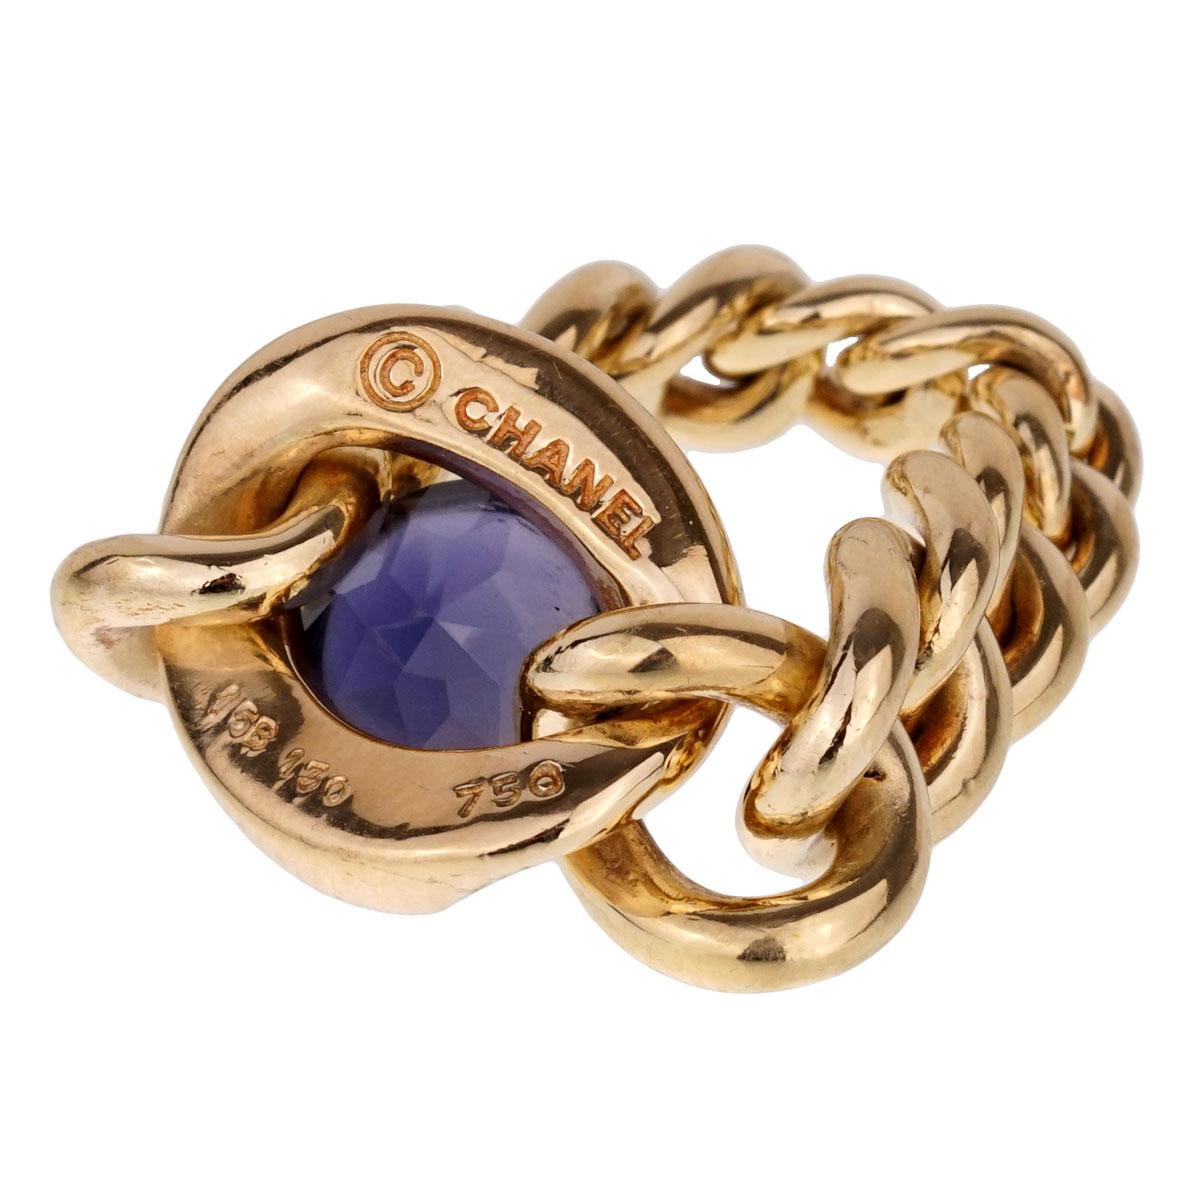 A fabulous Chanel ring with graduated chain links in 18k yellow gold showcasing a cabochon cut Iolite. The ring measures a size 6 1/2